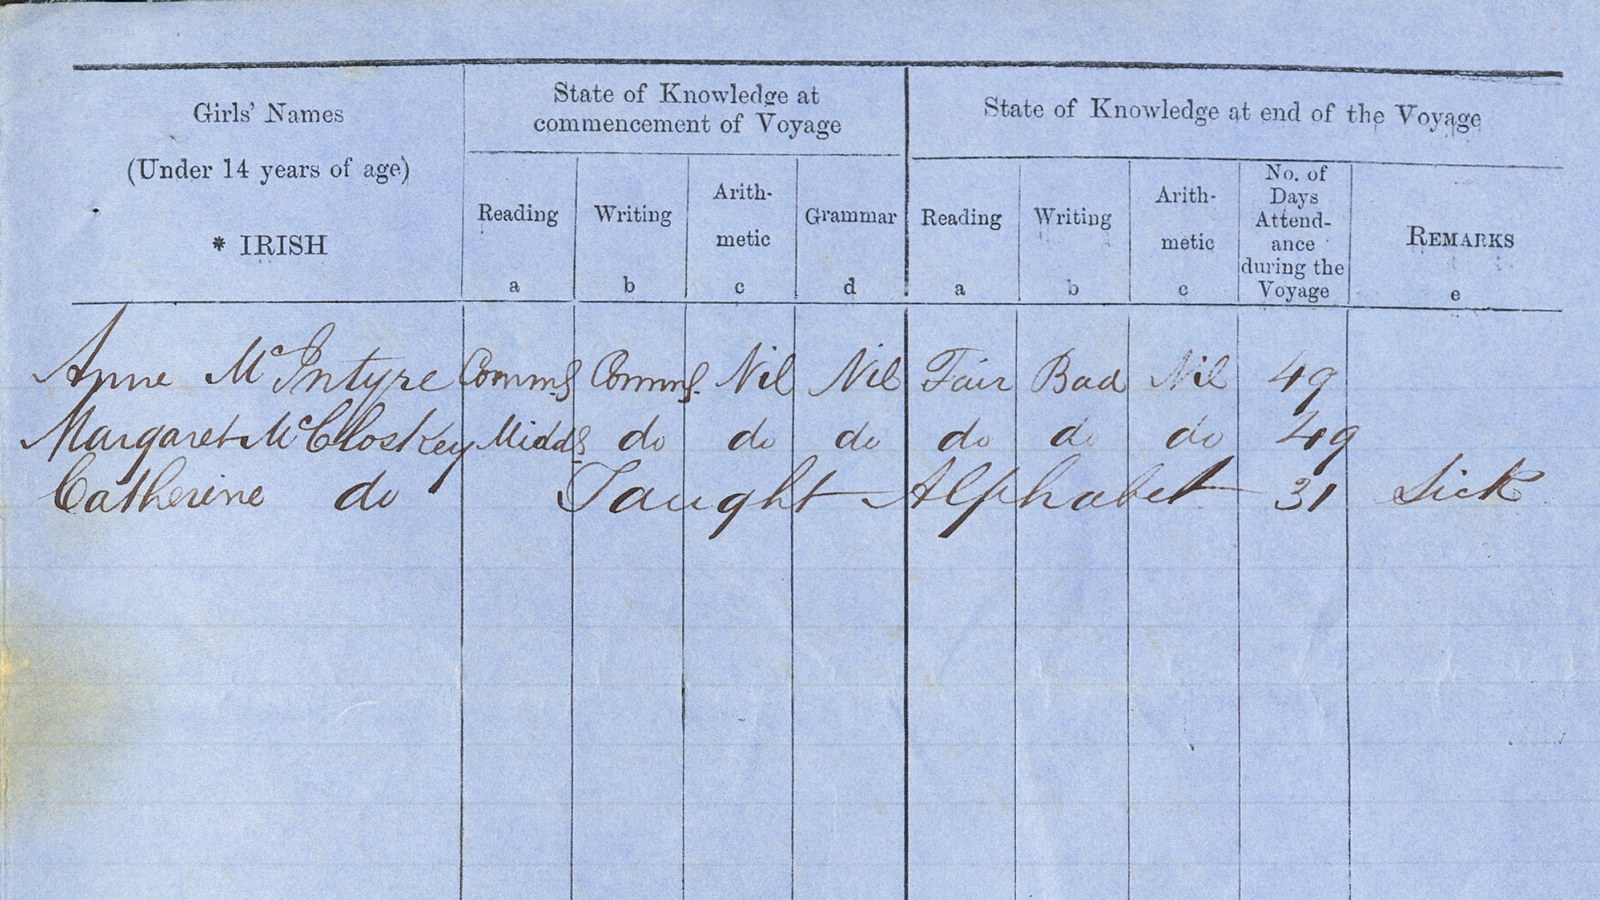 Handwritten entries in printed table with headings across top.